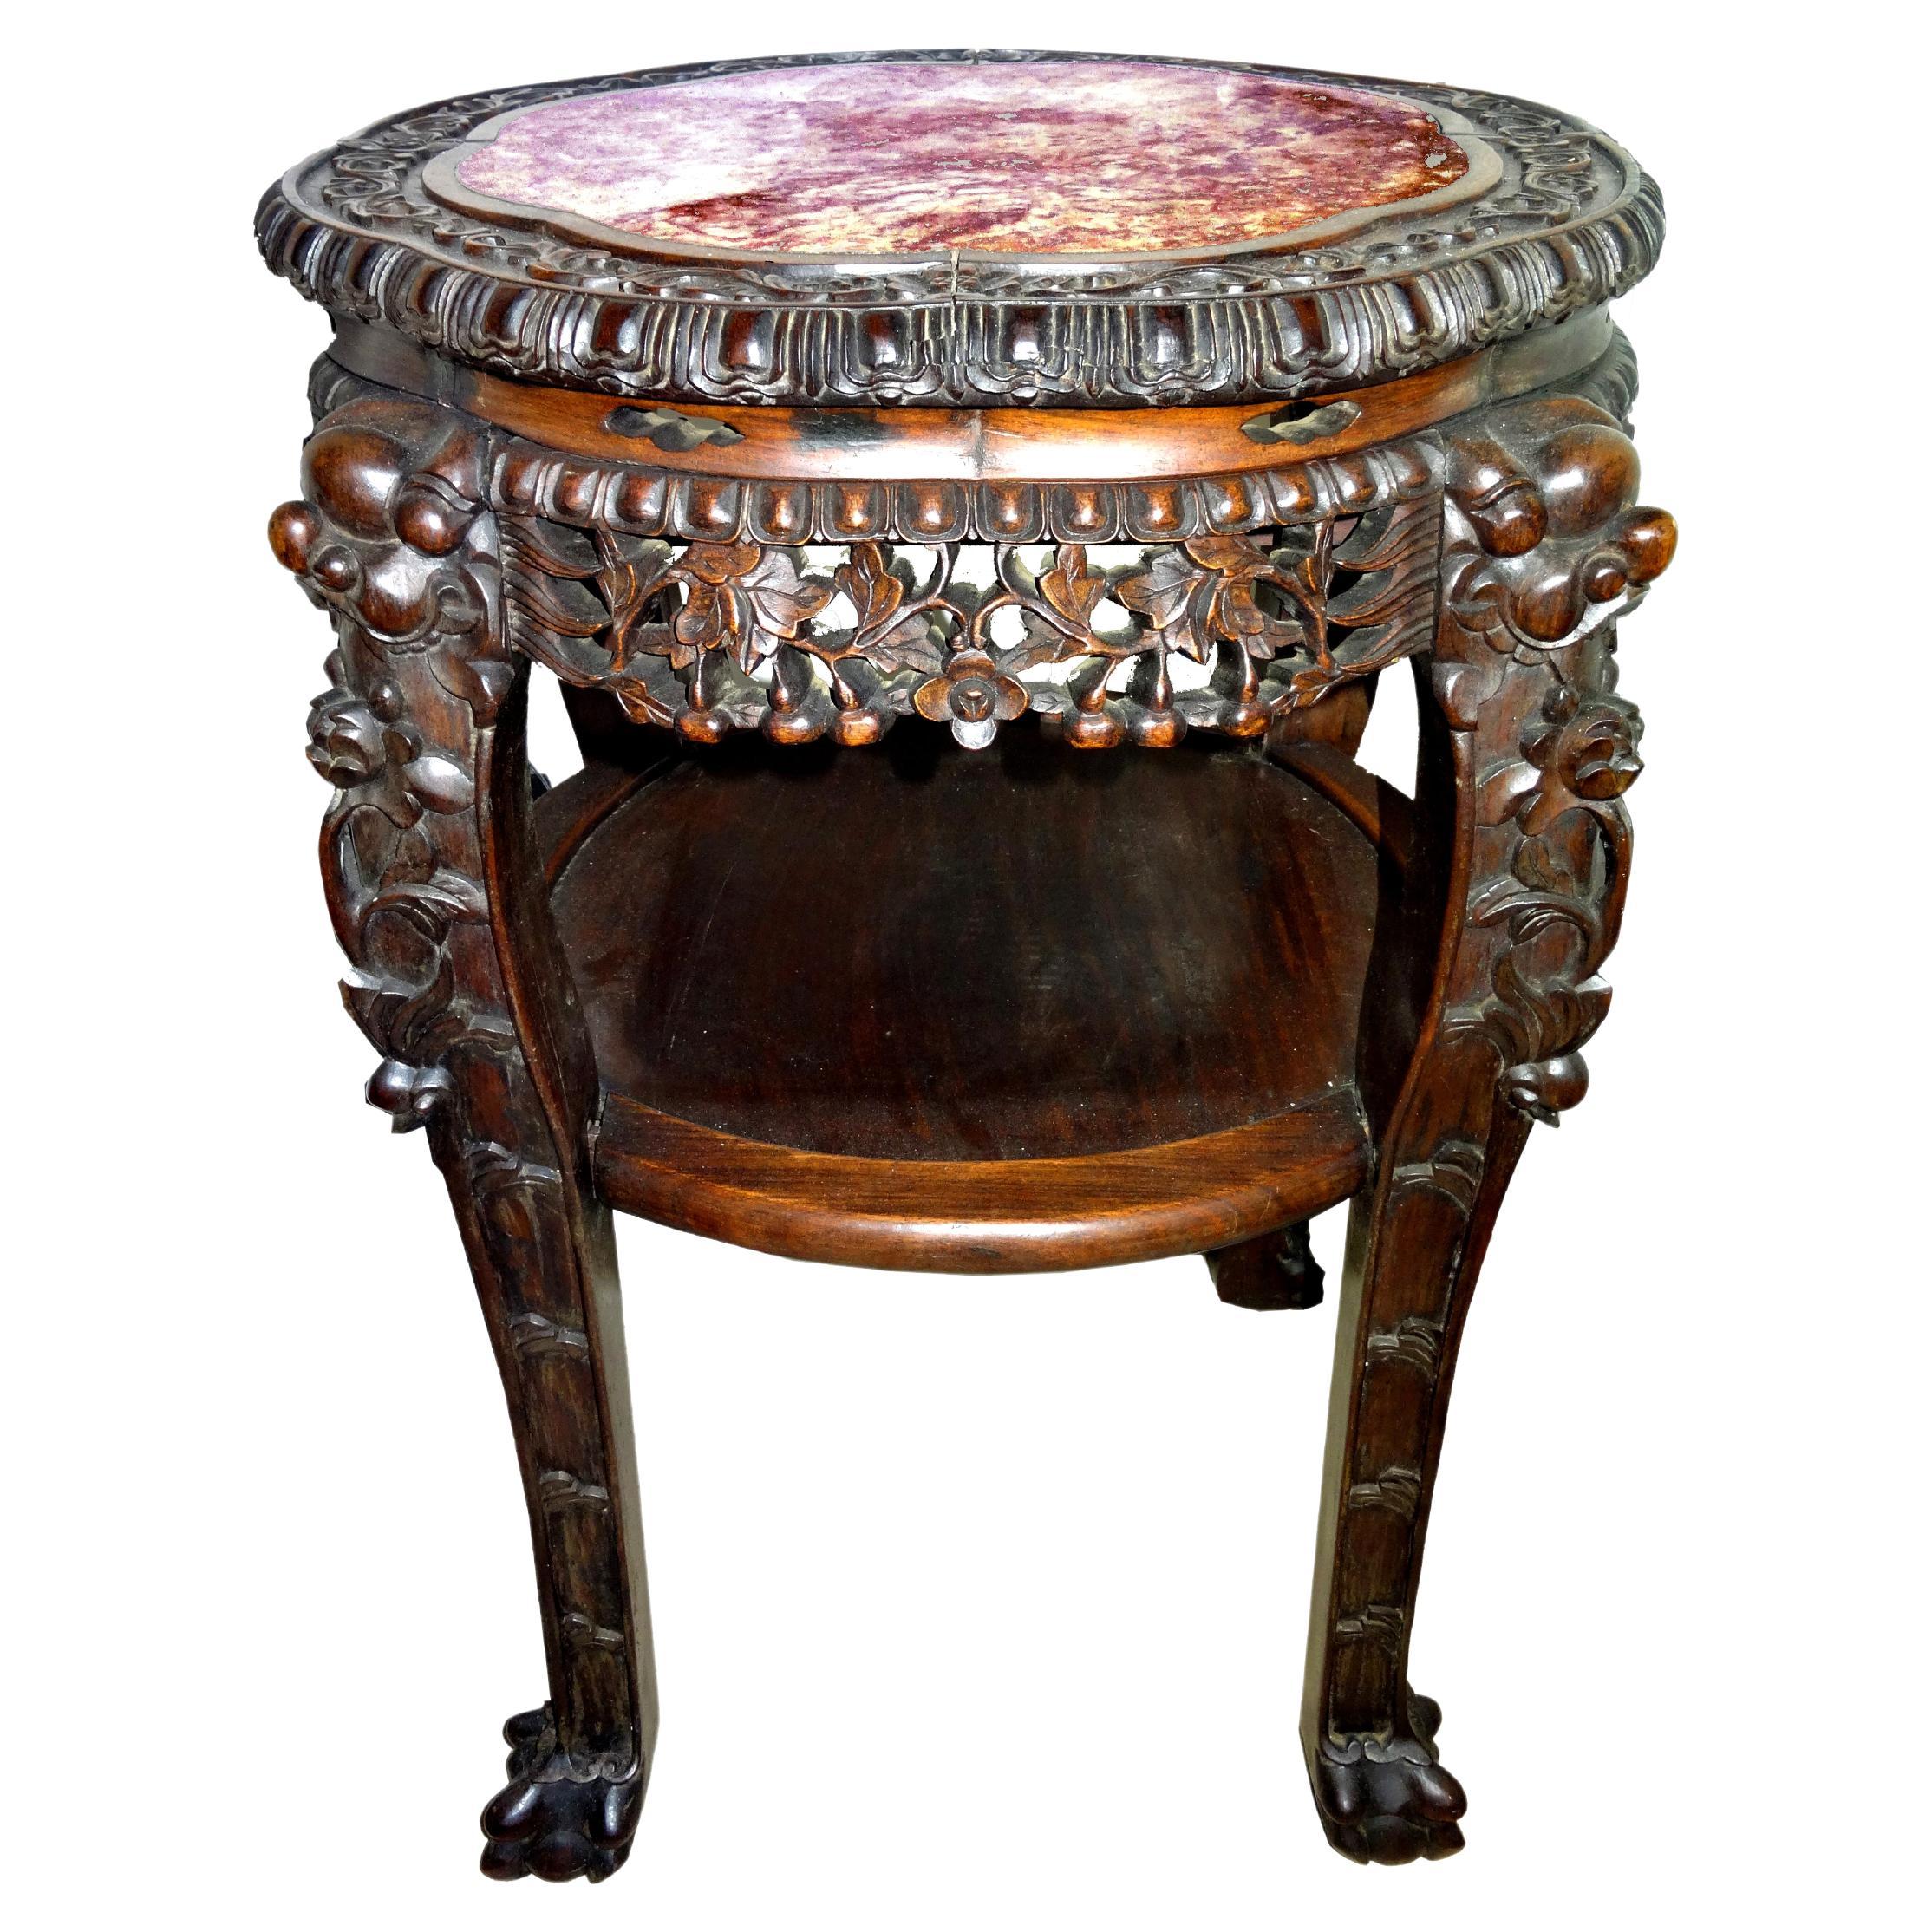 Chinese flower table around 1900 made of rosewood with marble top